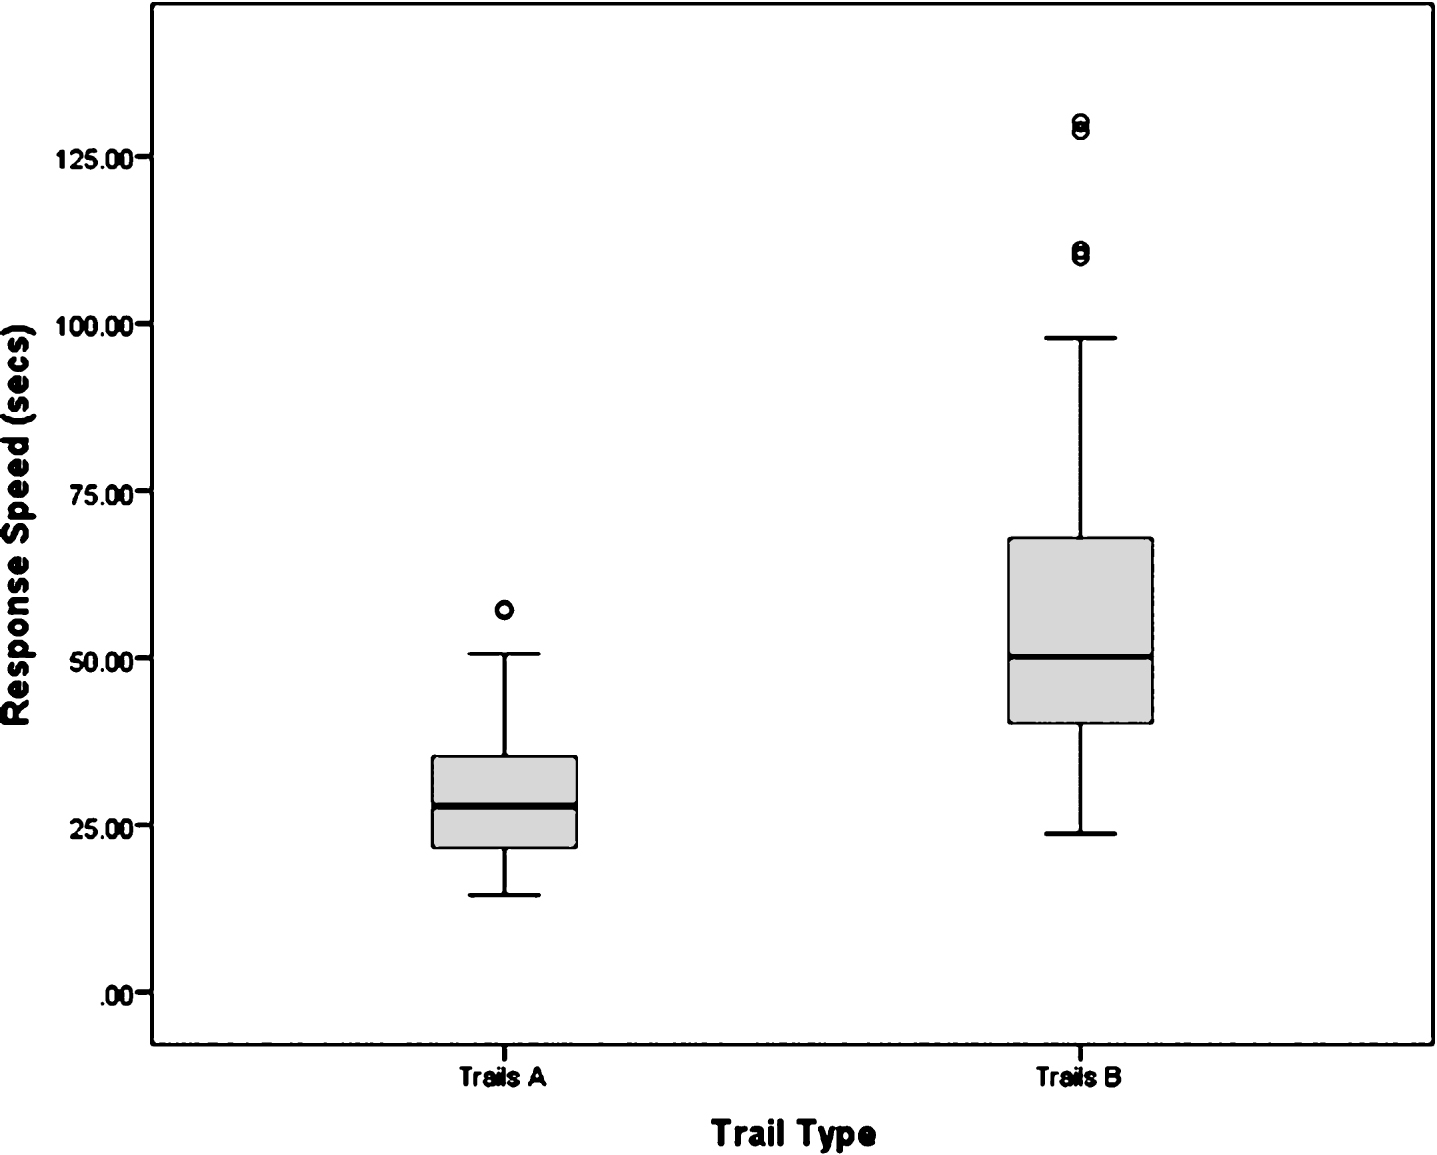 Box plot of mean information processing speed (s) for Trails A and B performance in older adults.